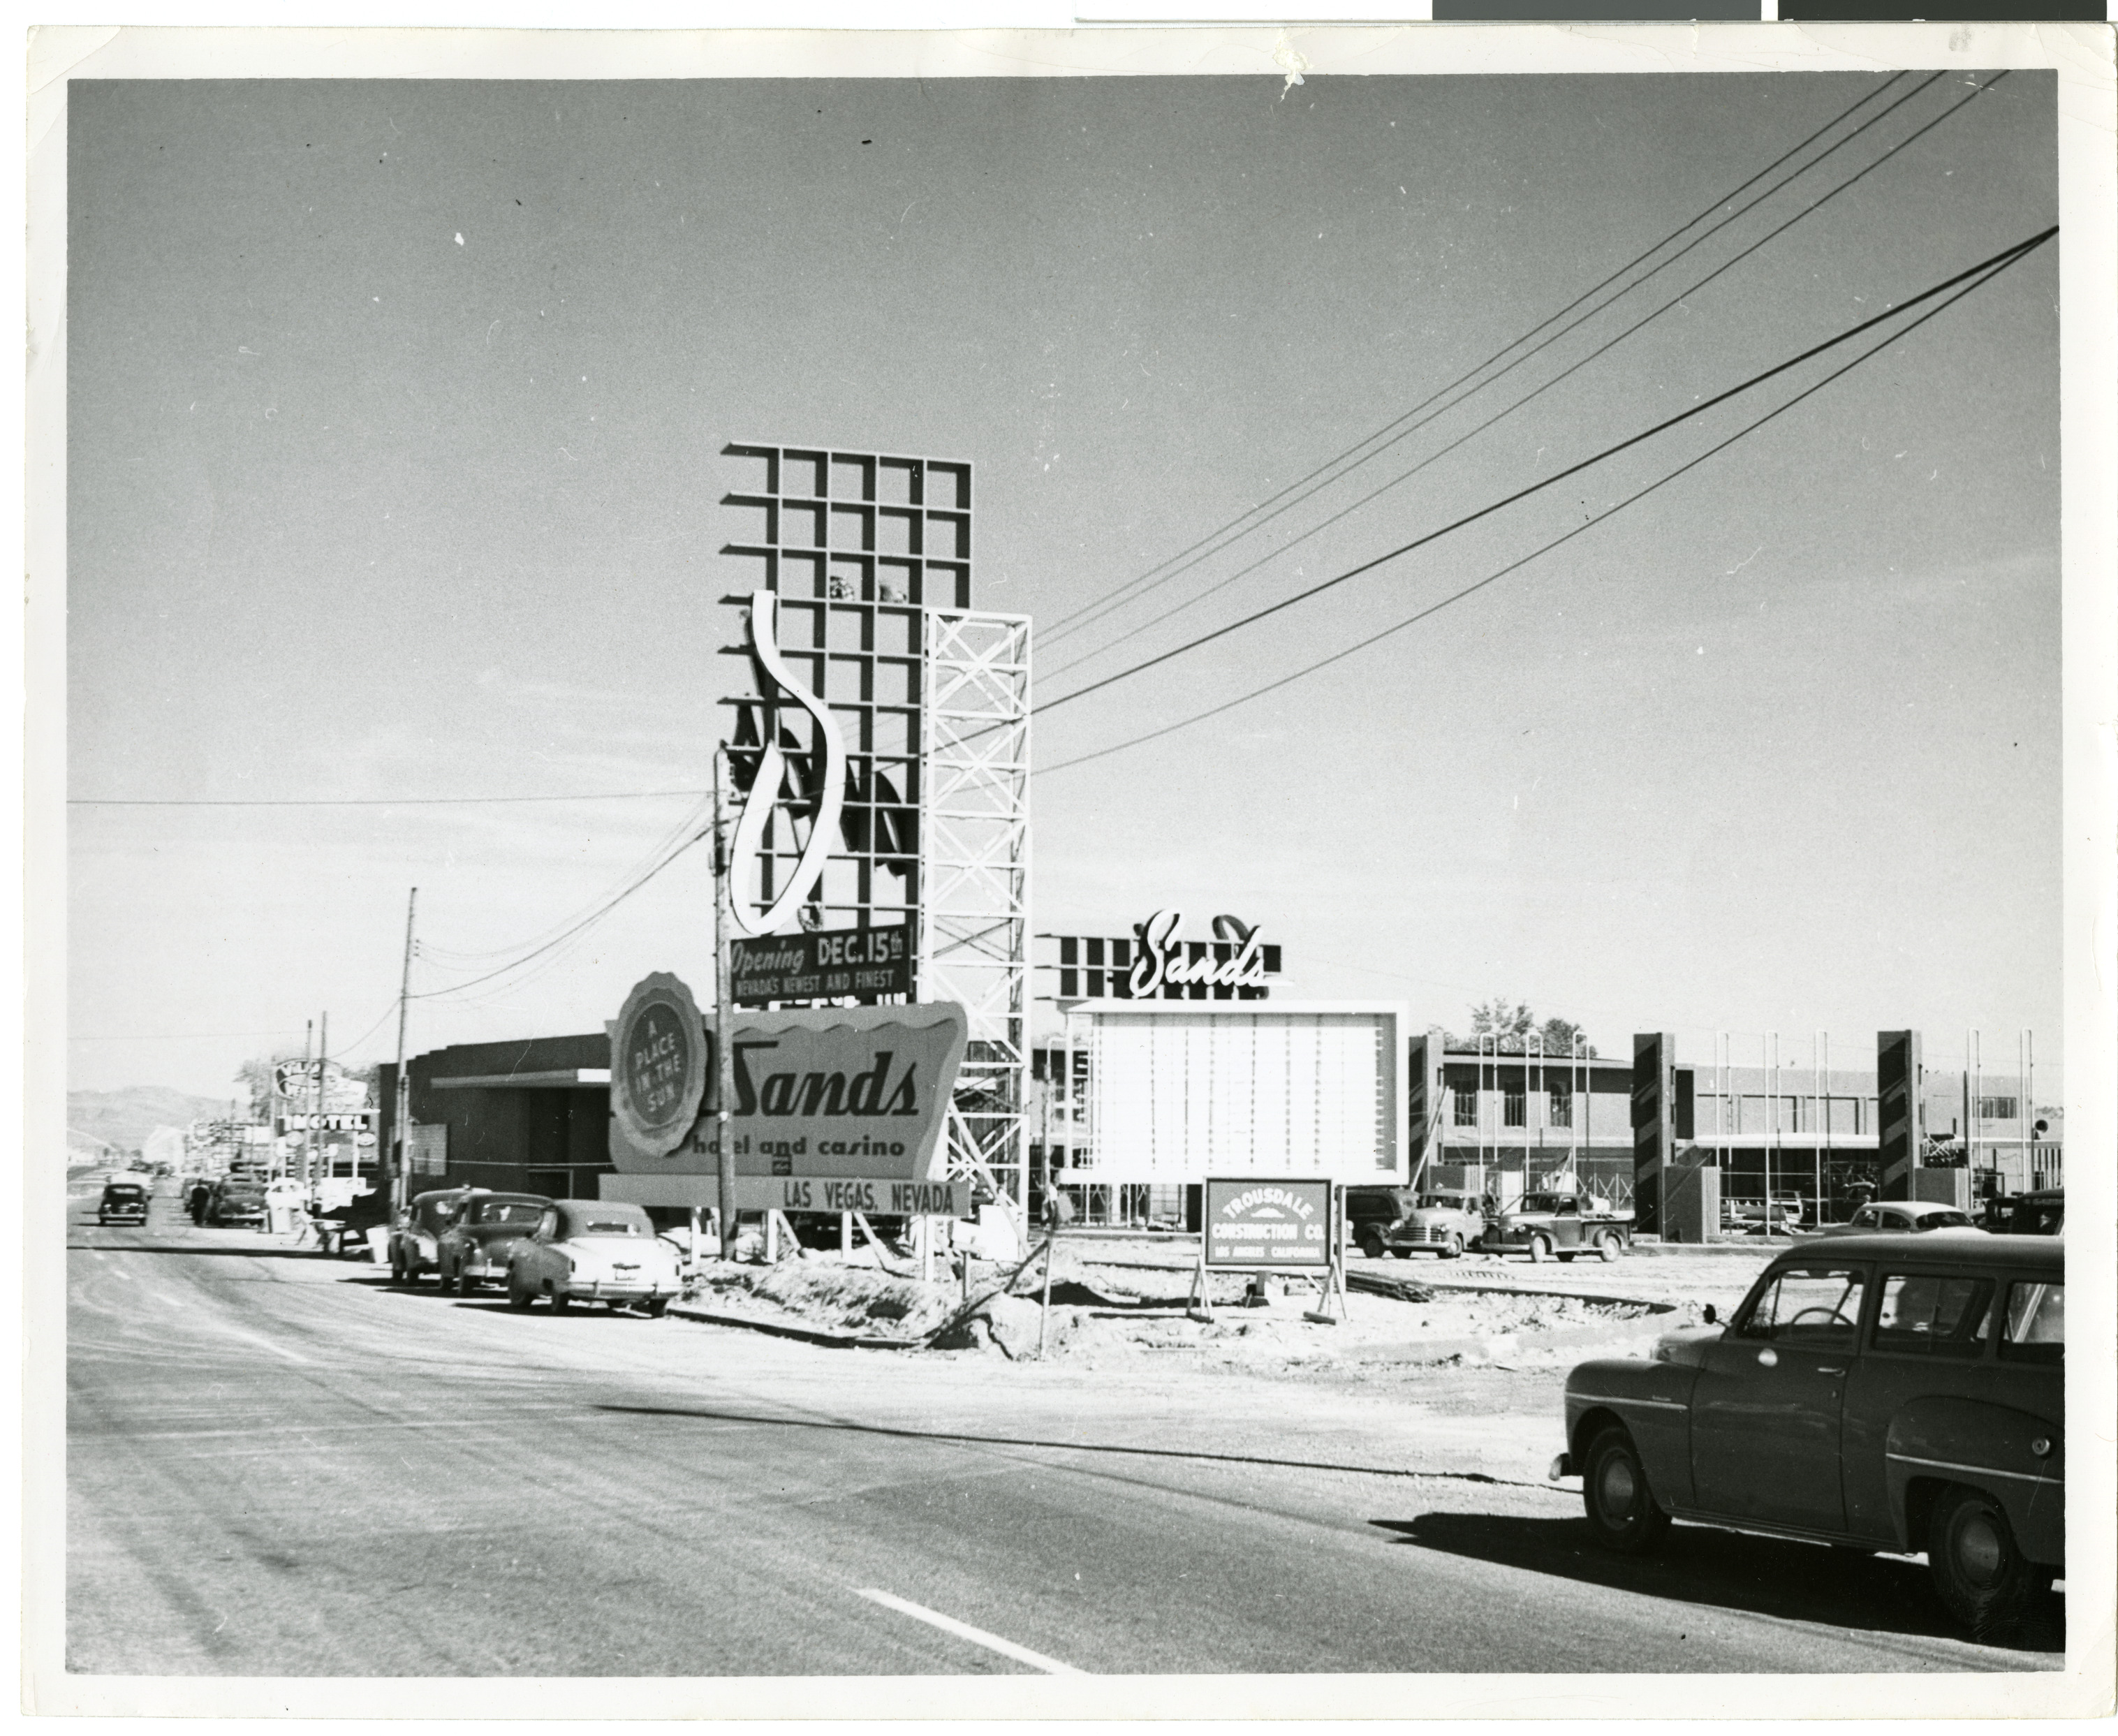 Photograph of the assembly of the sign in front of the Sands (Las Vegas), circa 1953